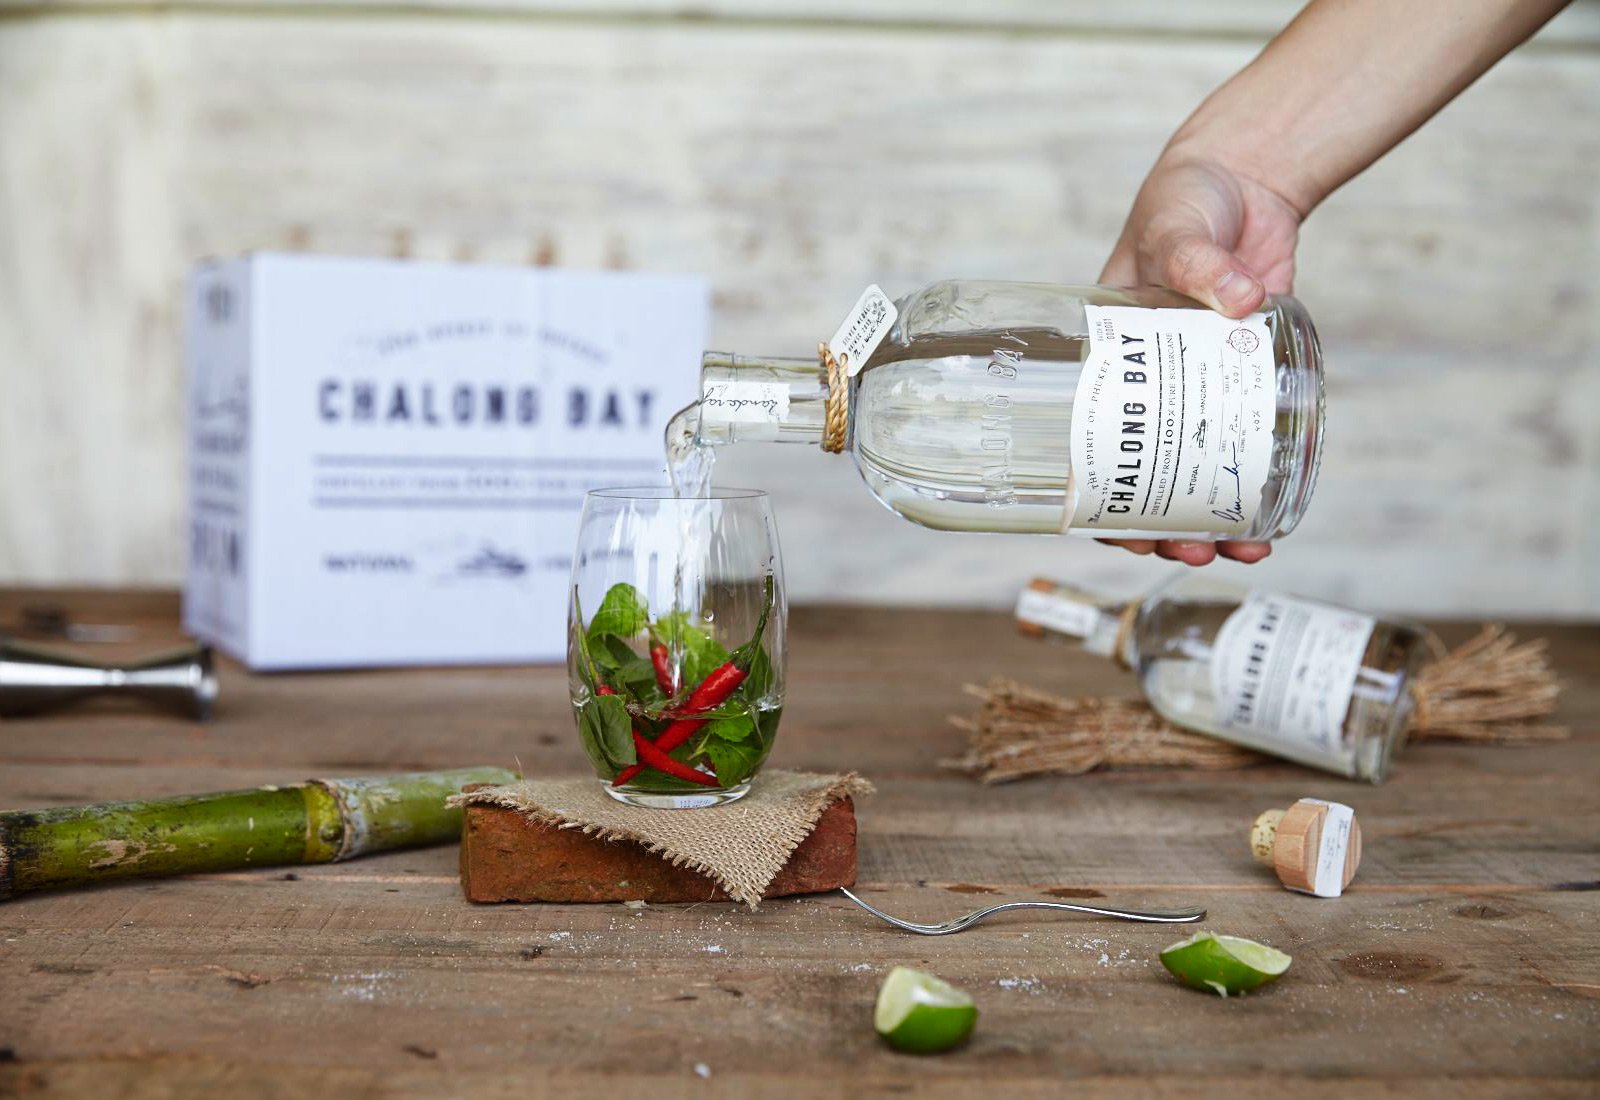 How to try local Chalong Bay rum in Phuket